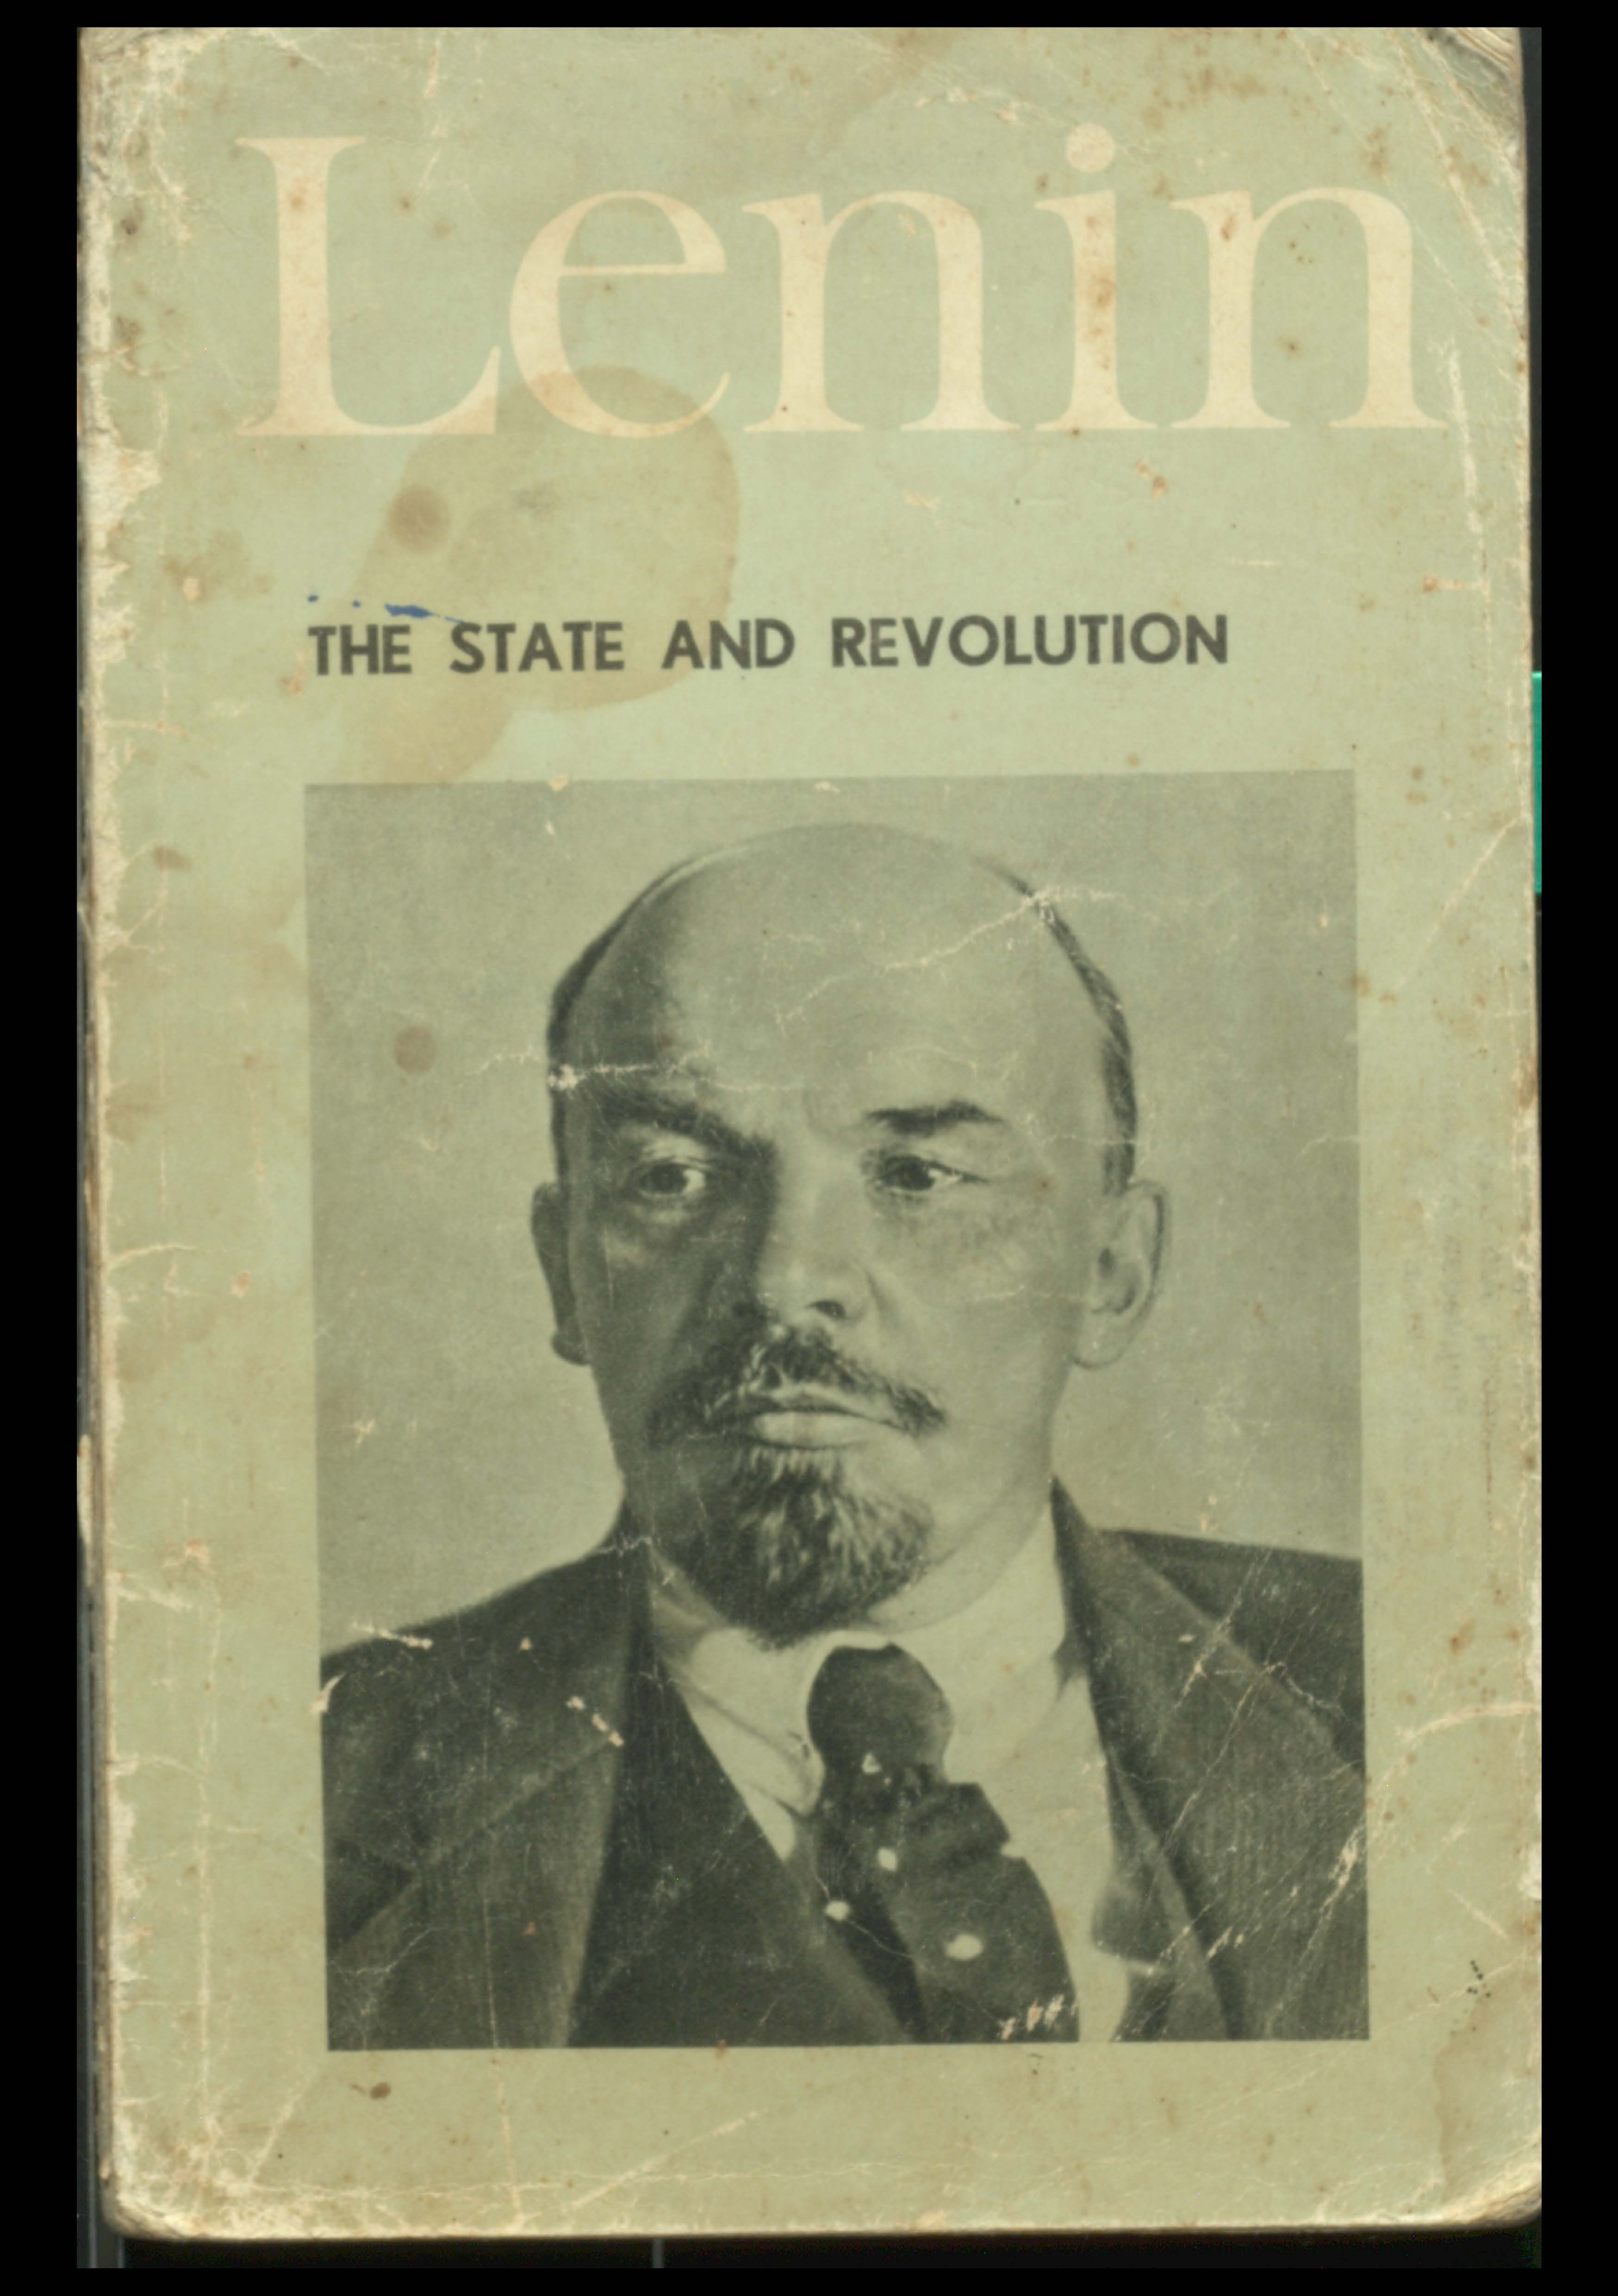 LENIN the state and revolution